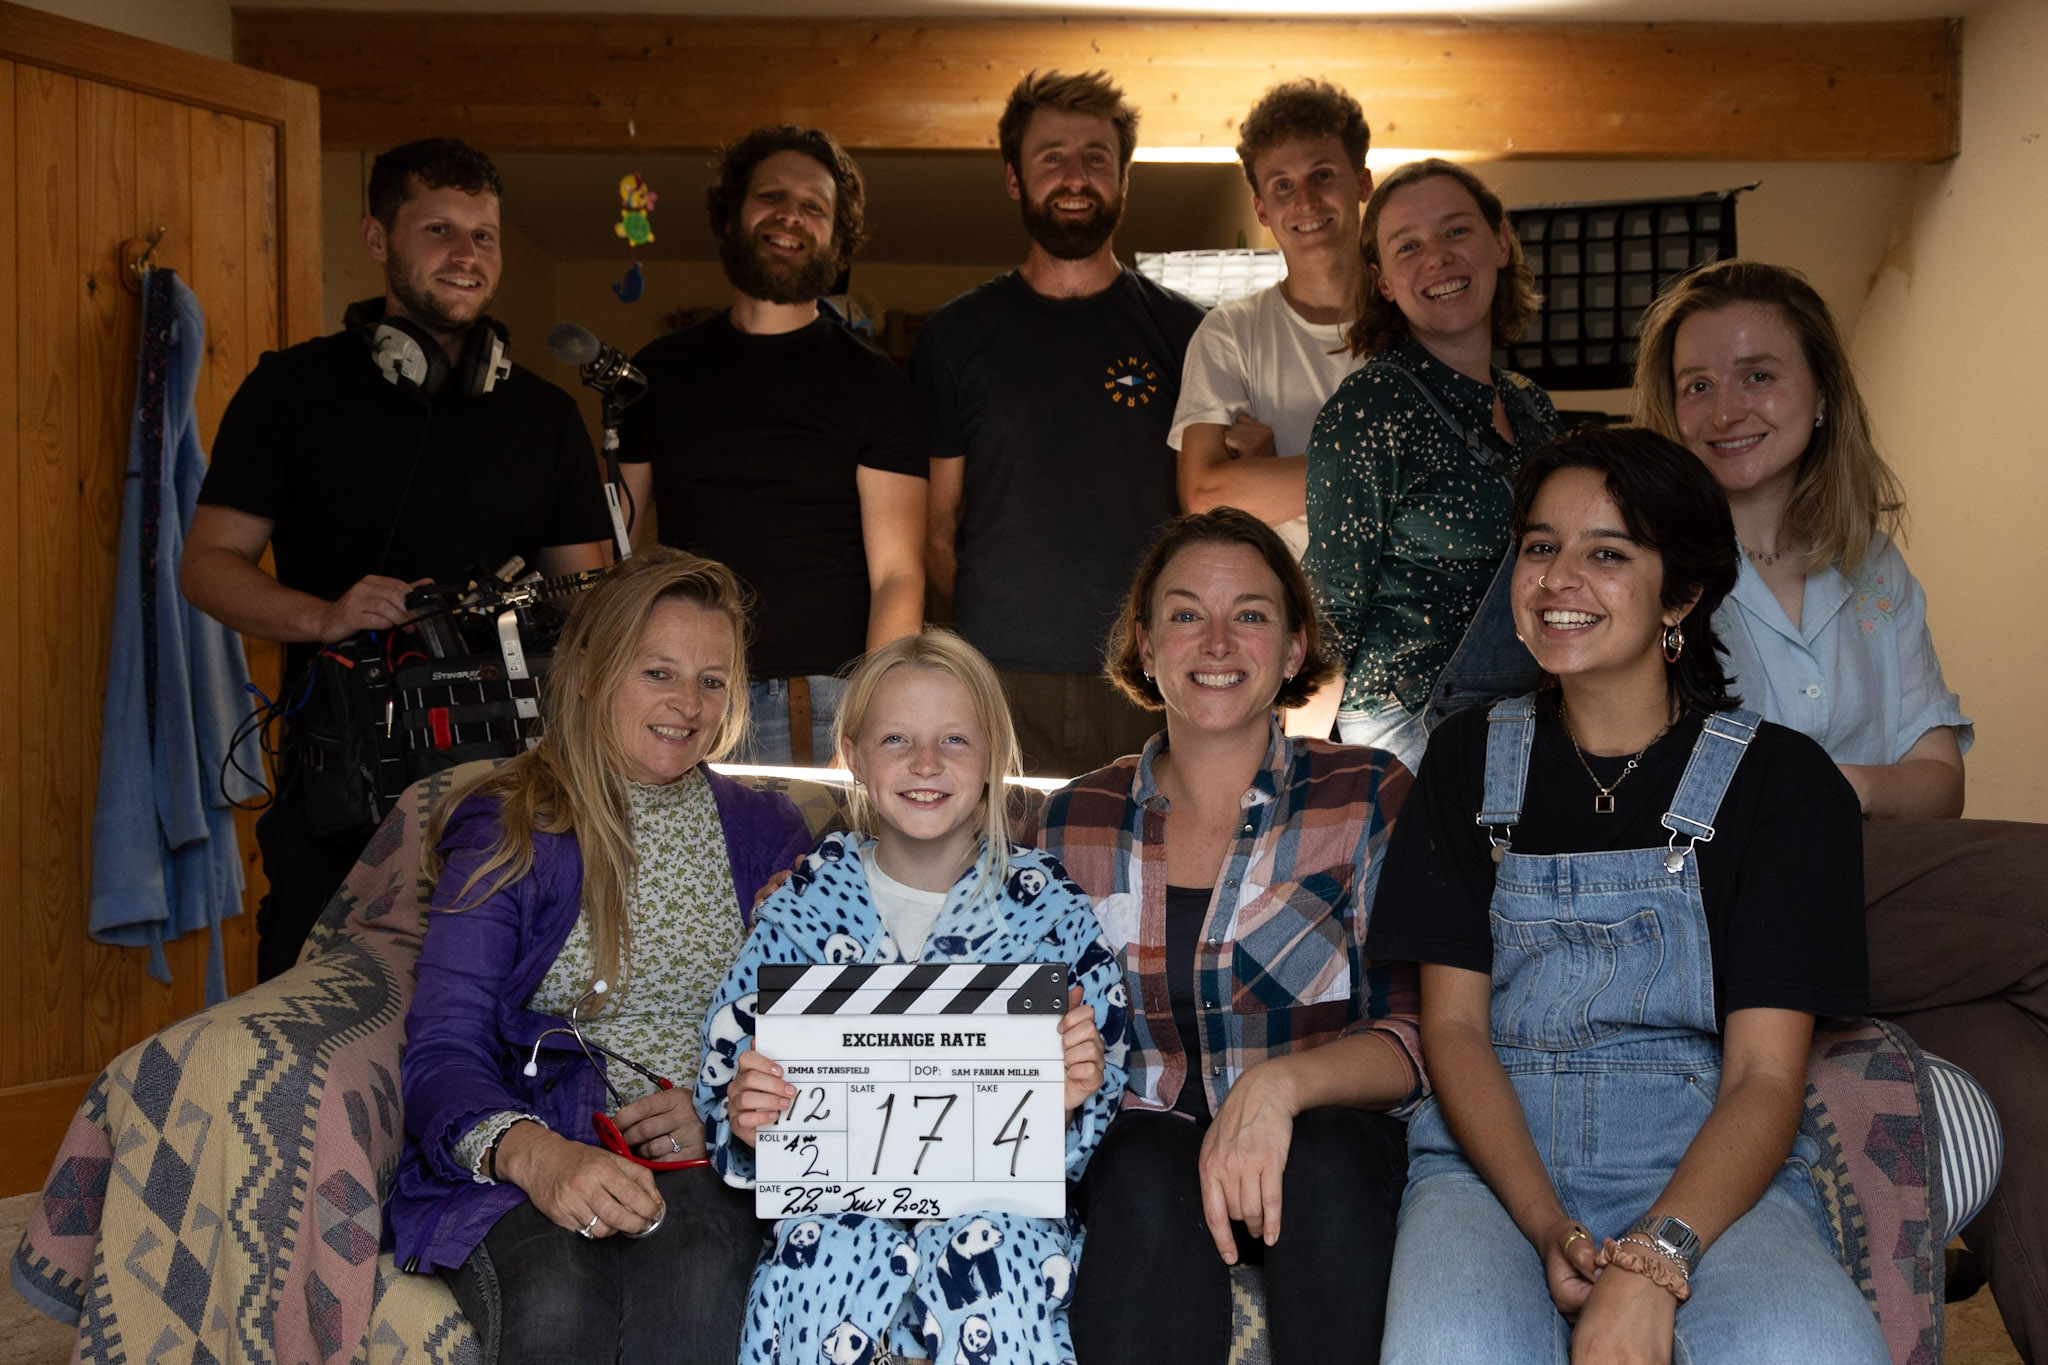 Cast and crew of Exchange Rate sitting together on the sofa of the film set.